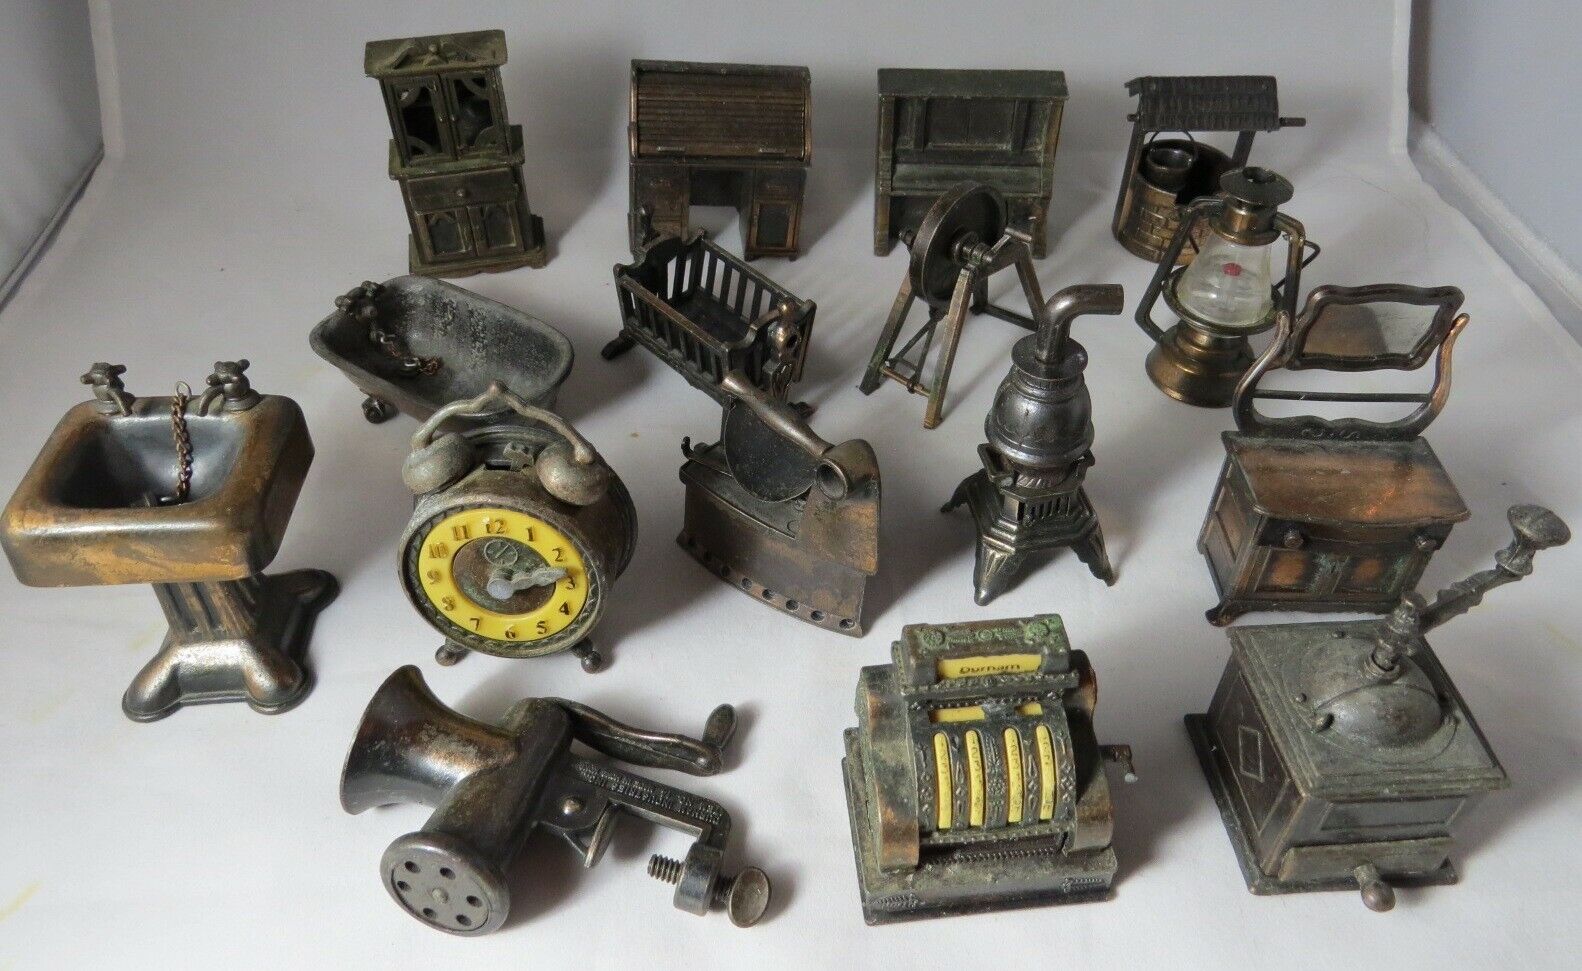 Lot 16 Vintage DURHAM INDUSTRIES Metal MINIATURES and DOLLHOUSE FURNITURE 1970s 